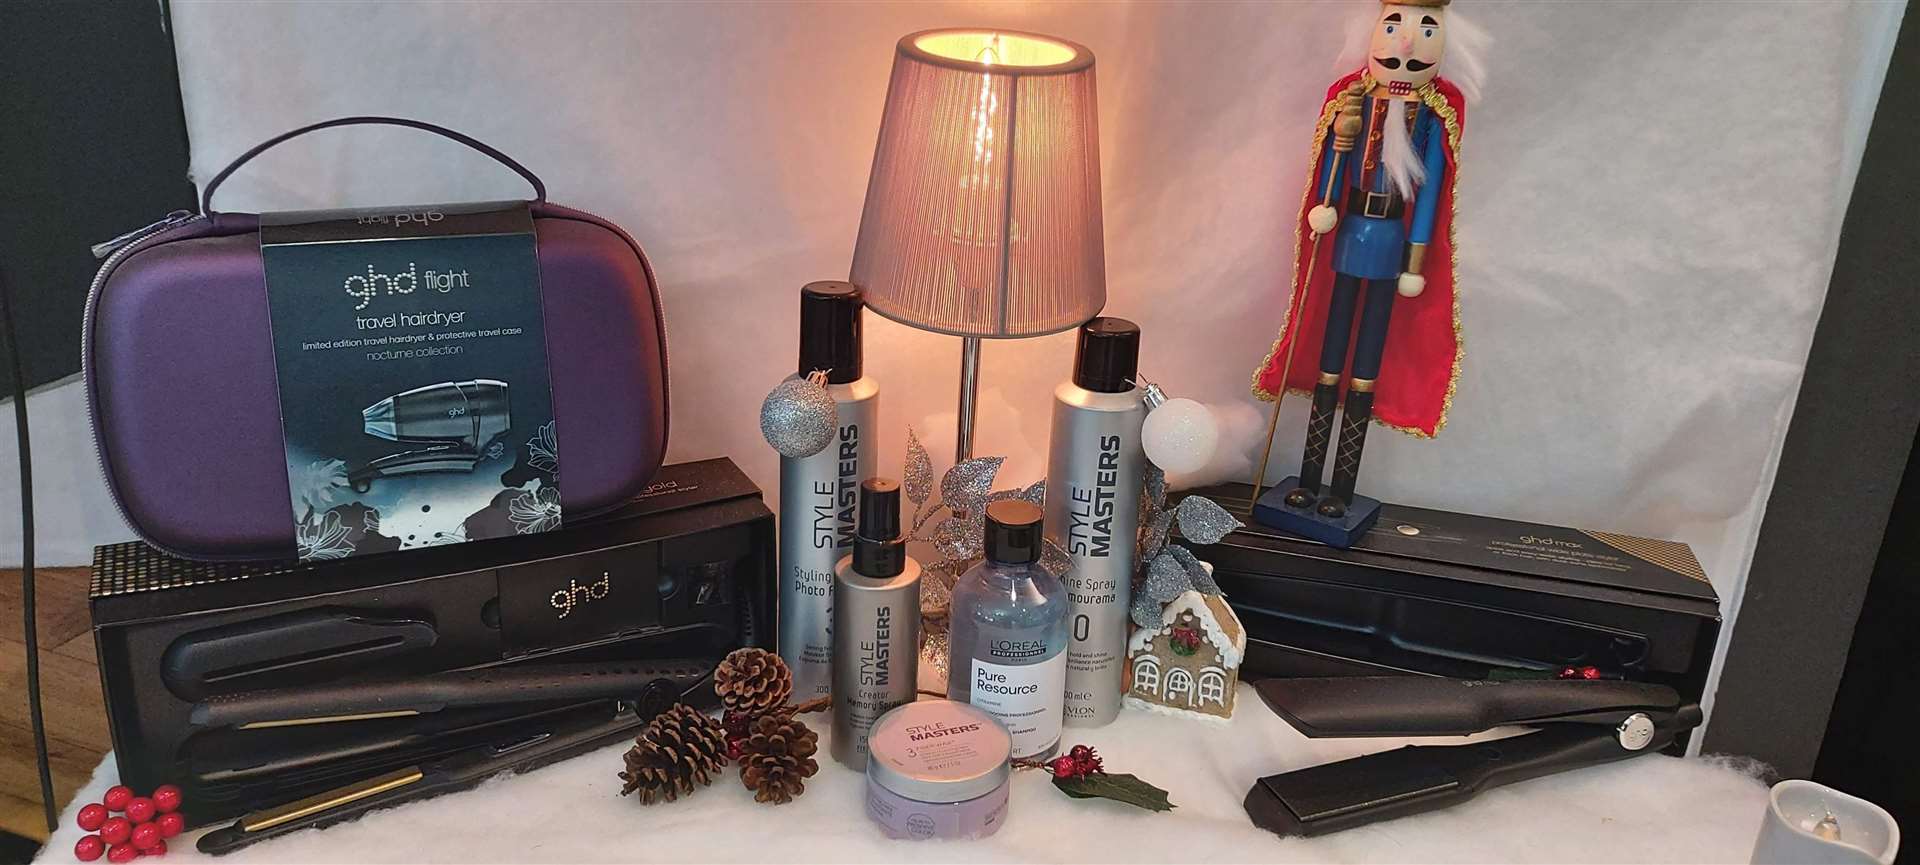 A pre-Christmas display of GHD products at the Mark Mardell salon